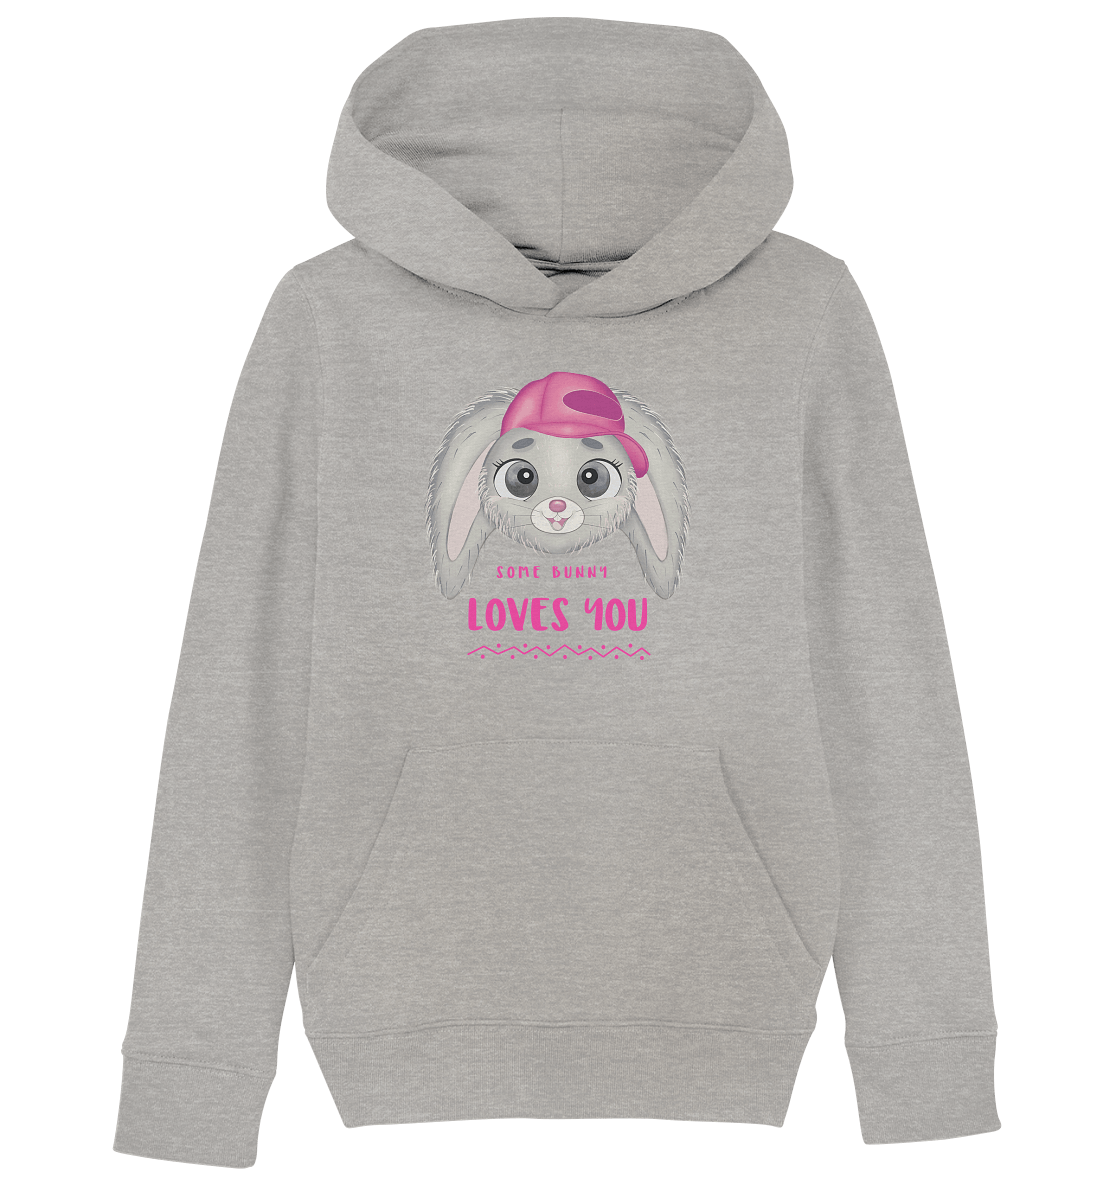 Bunny Hase Hoodie "Some Bunny loves you" in grau